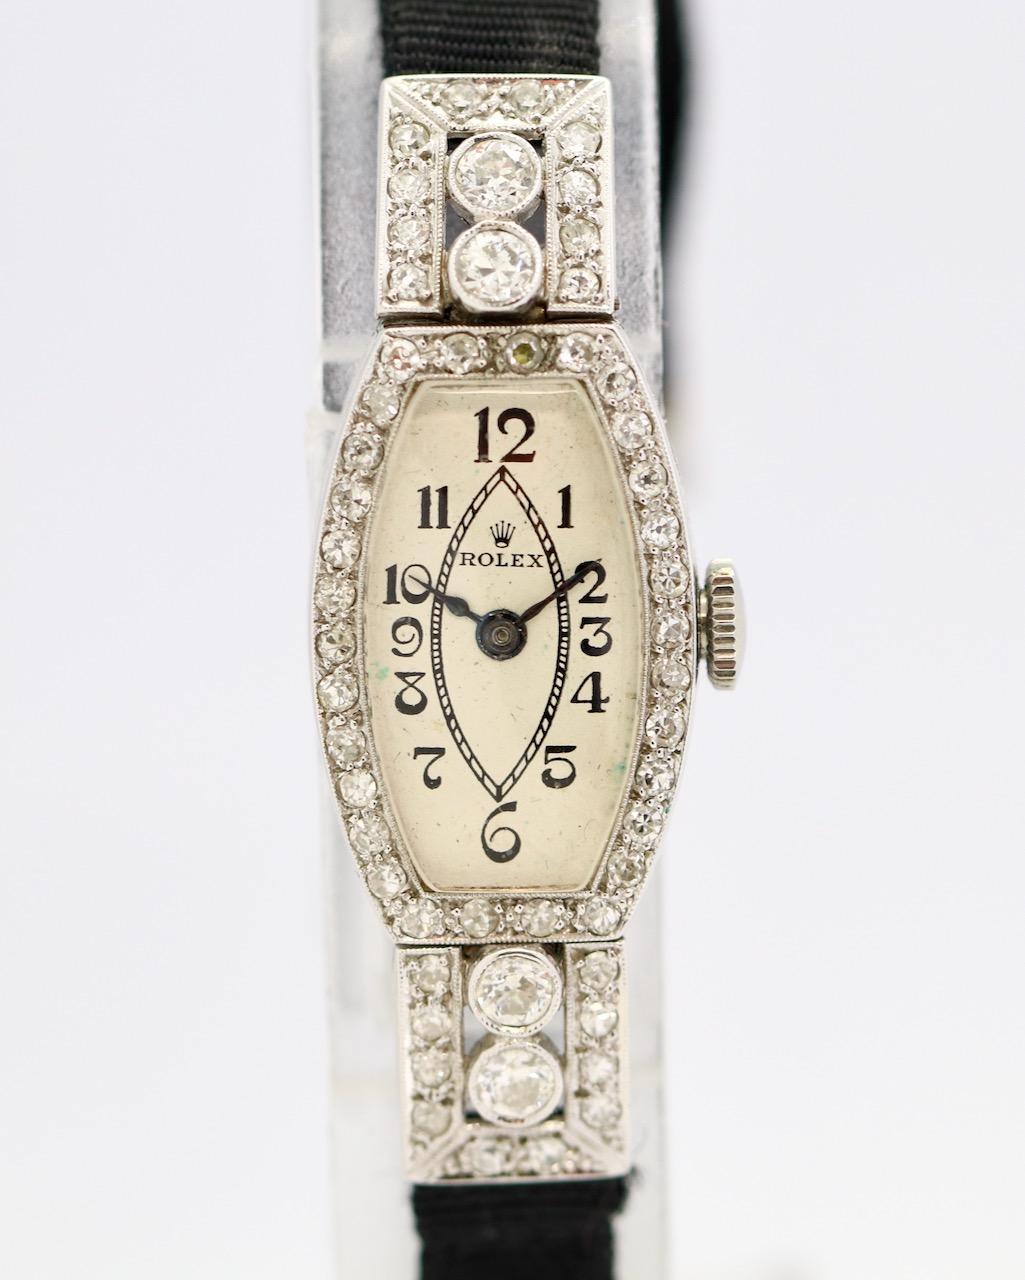 Enchanting Rolex Art Deco women's wristwatch - a timeless jewel in white gold and diamonds

This Rolex Art Deco women's wristwatch is not only an expression of the finest watchmaking art, but also a shining testimony to the elegance and style of the